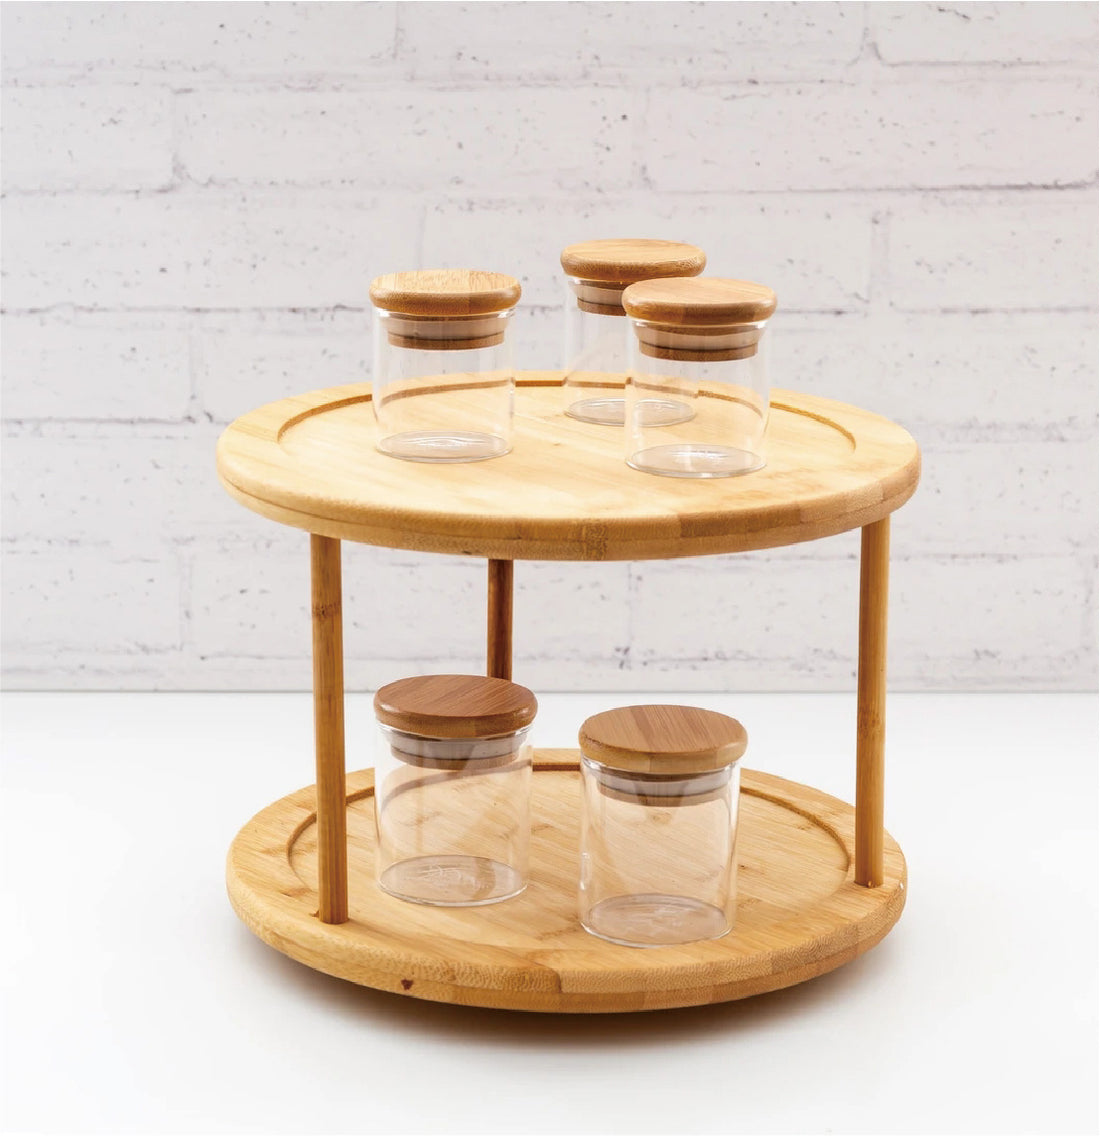 Bamboo Harmony in Your Kitchen: The 2-Tier Lazy Susan Turntable